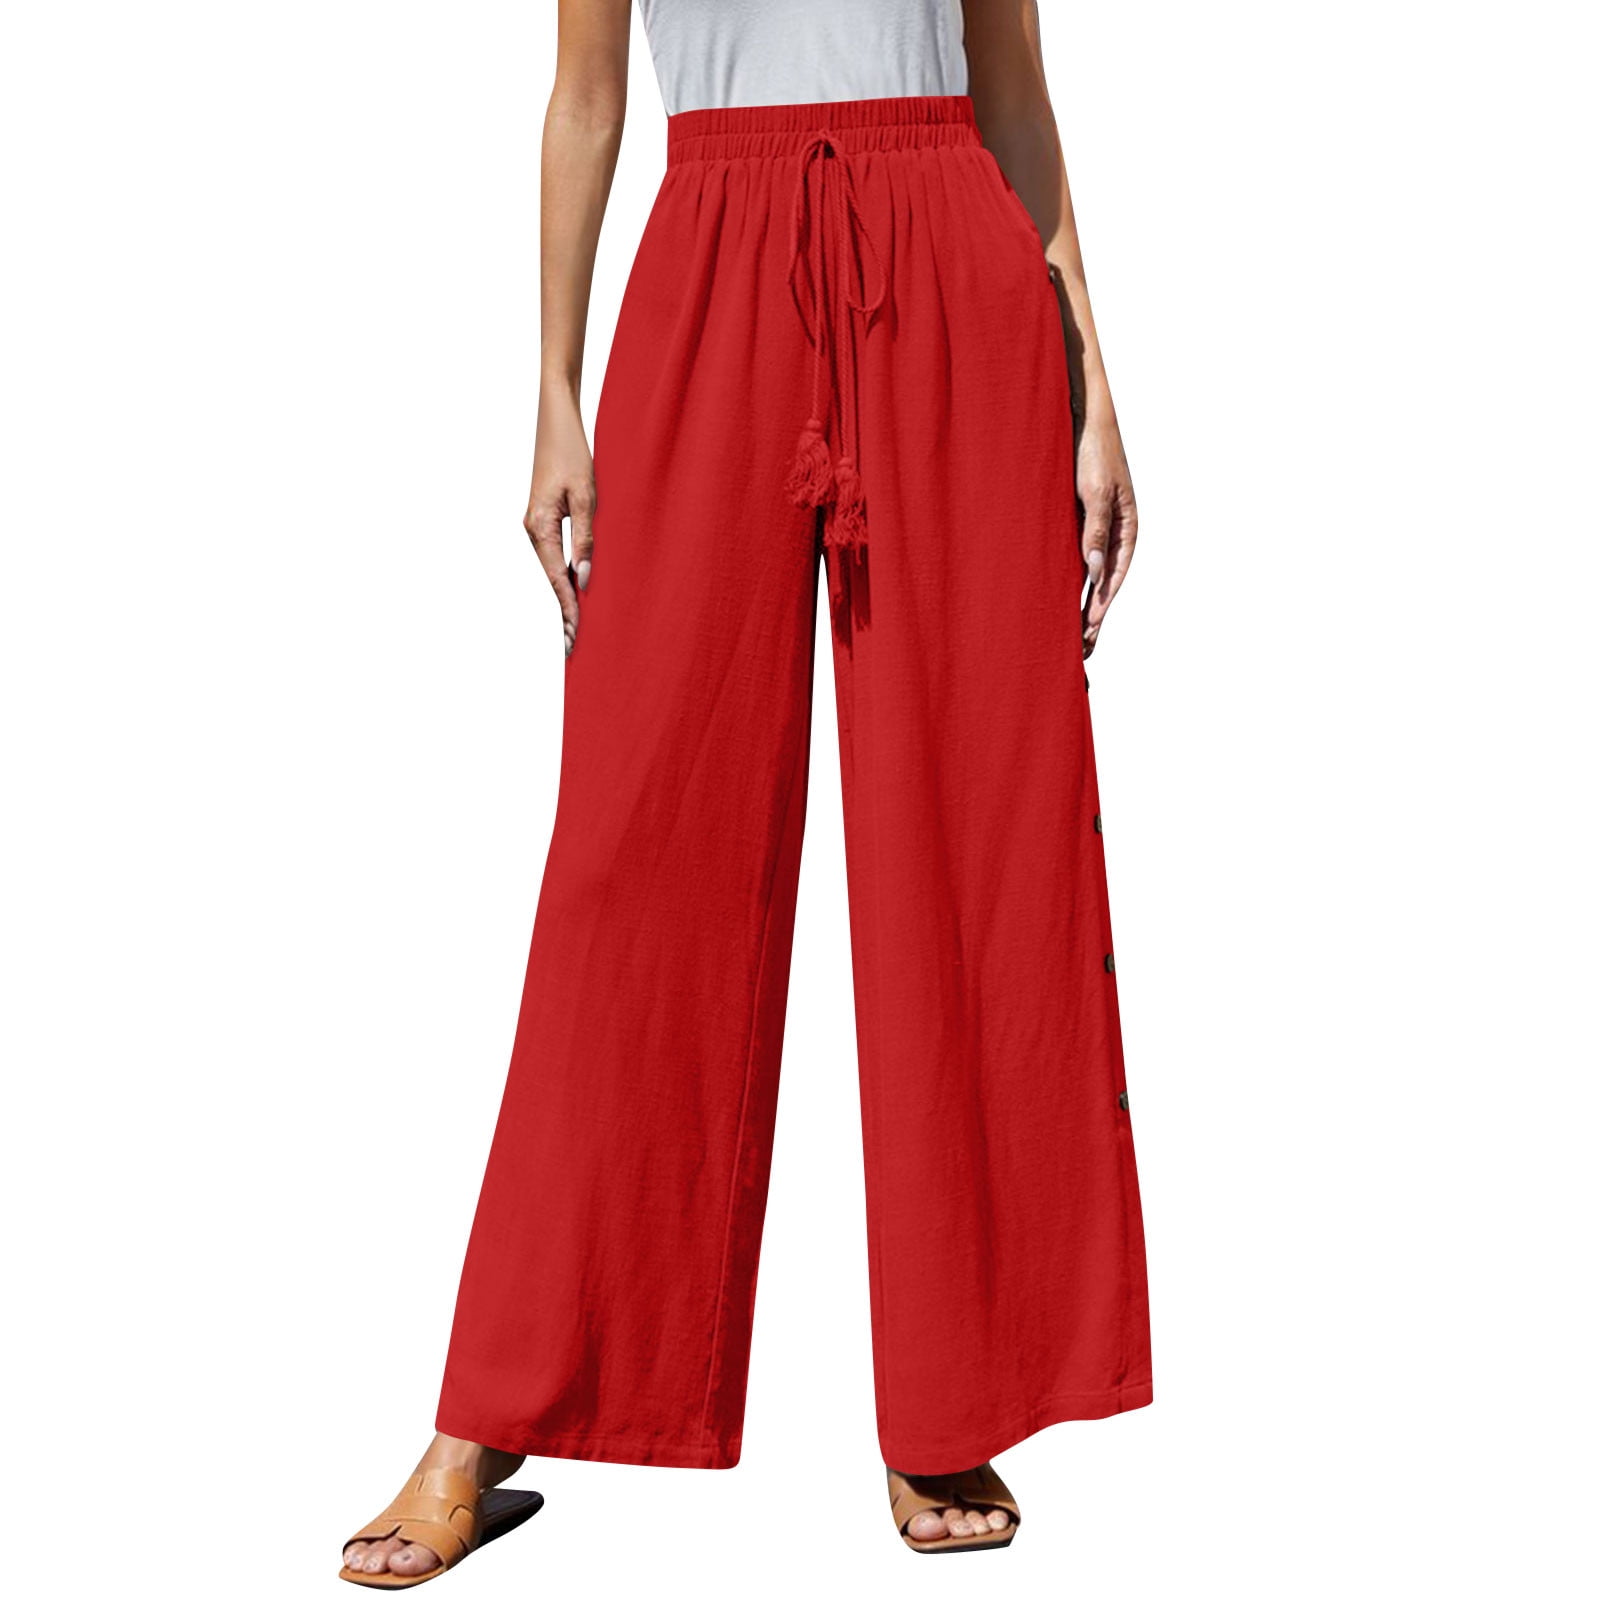 PRETTYGARDEN Women's Casual Long Palazzo Pants Elastic High Waist Wide Leg  Loose Boho Lounge Trousers, Wine Red, Large : Buy Online at Best Price in  KSA - Souq is now : Fashion